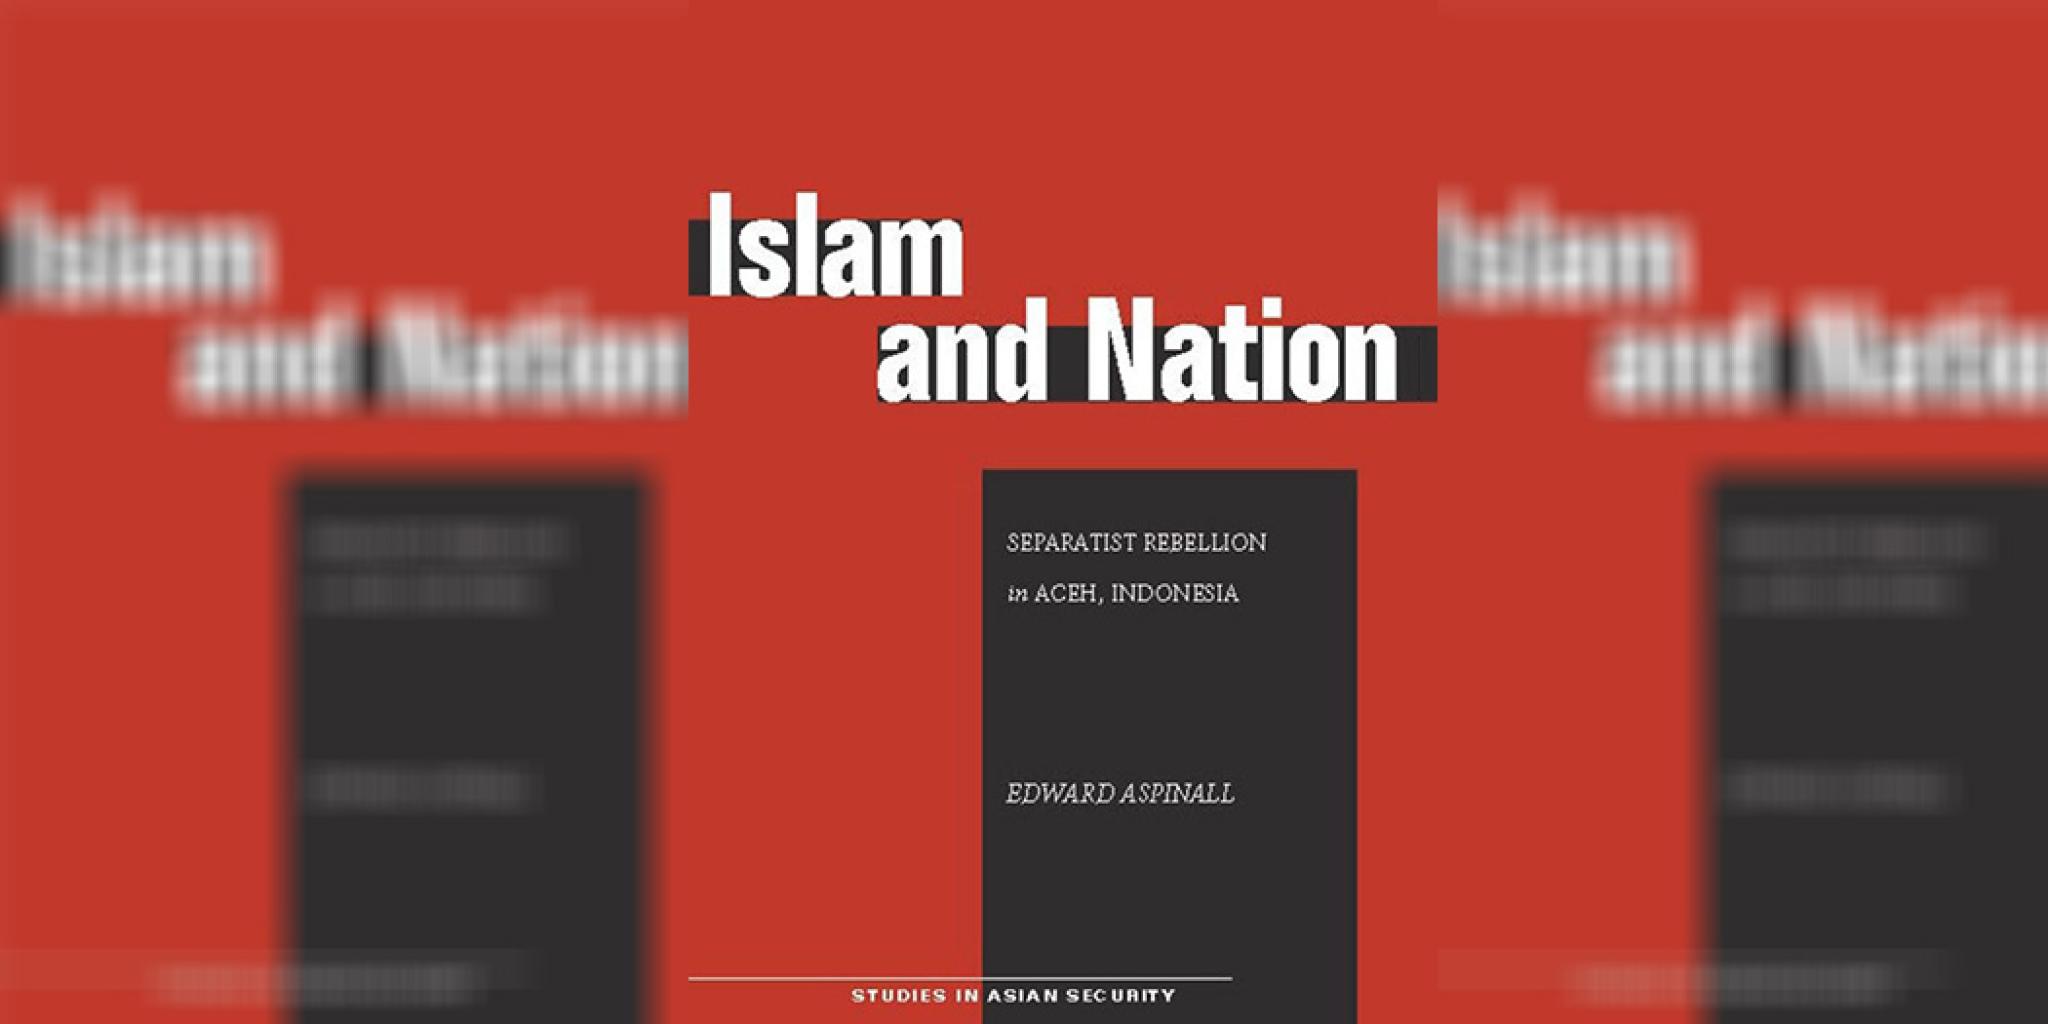 Islam and Nation book cover